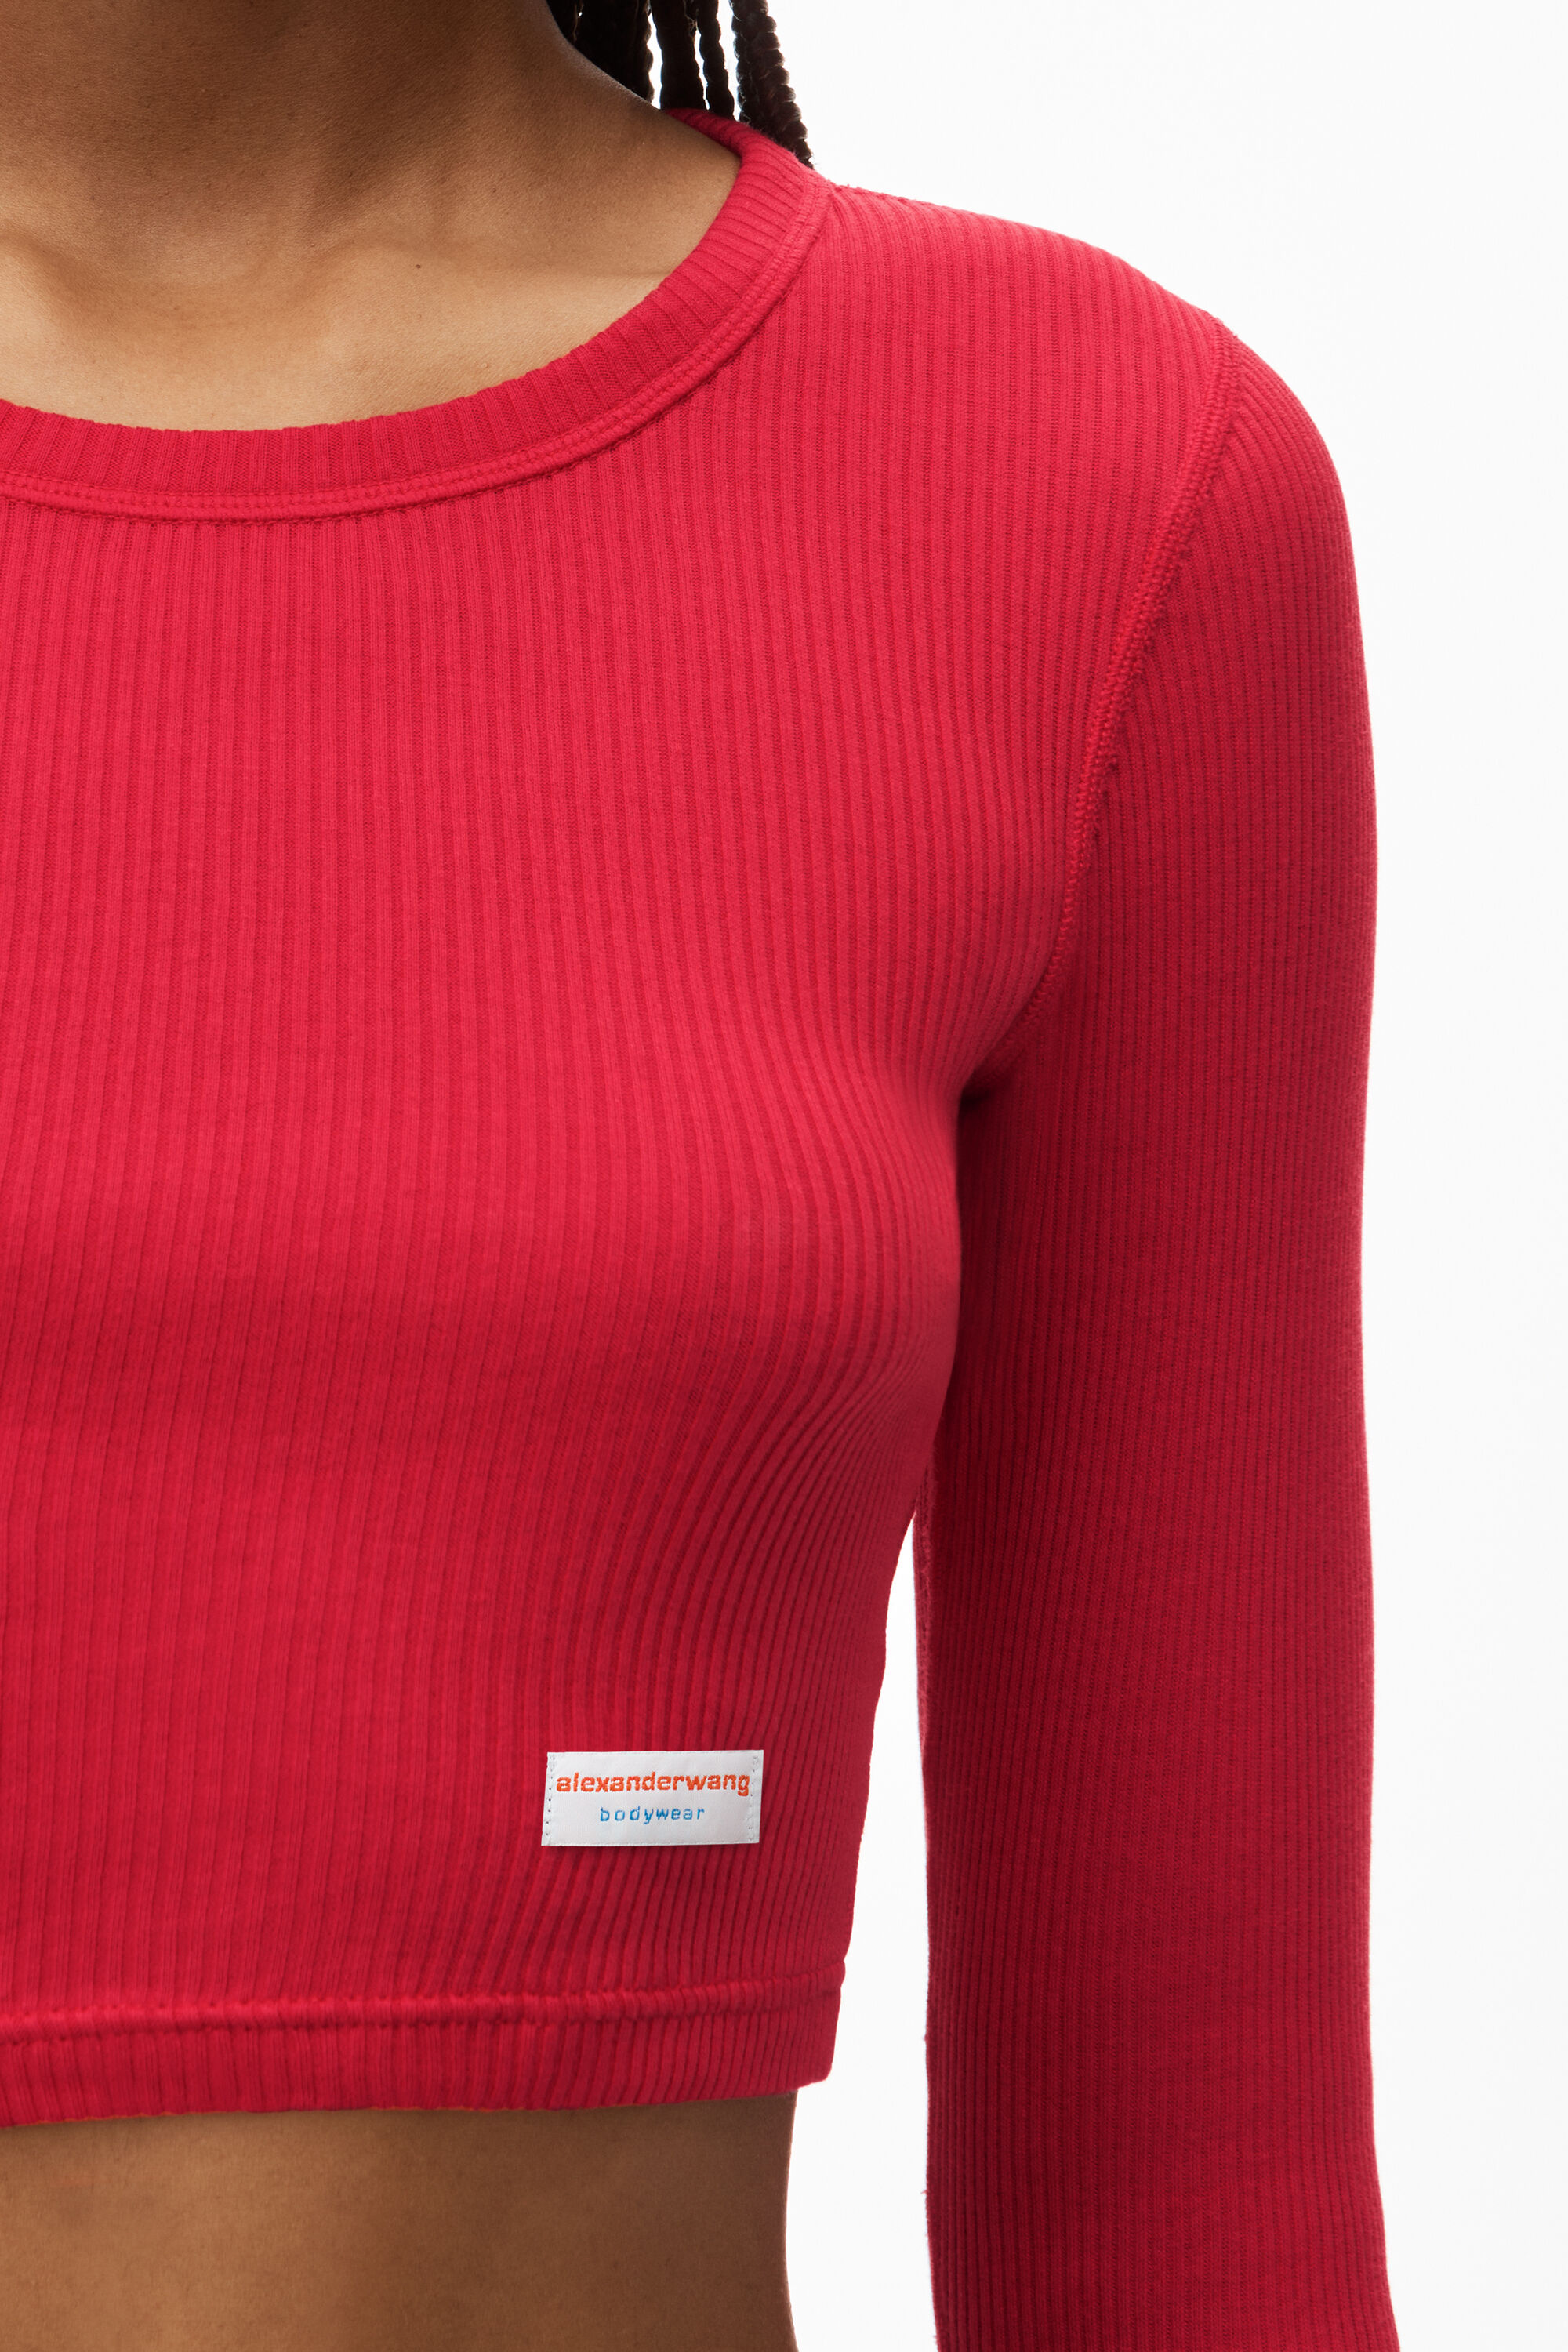 Cropped Long-Sleeve Tee in Ribbed Cotton Jersey in BARBERRY 